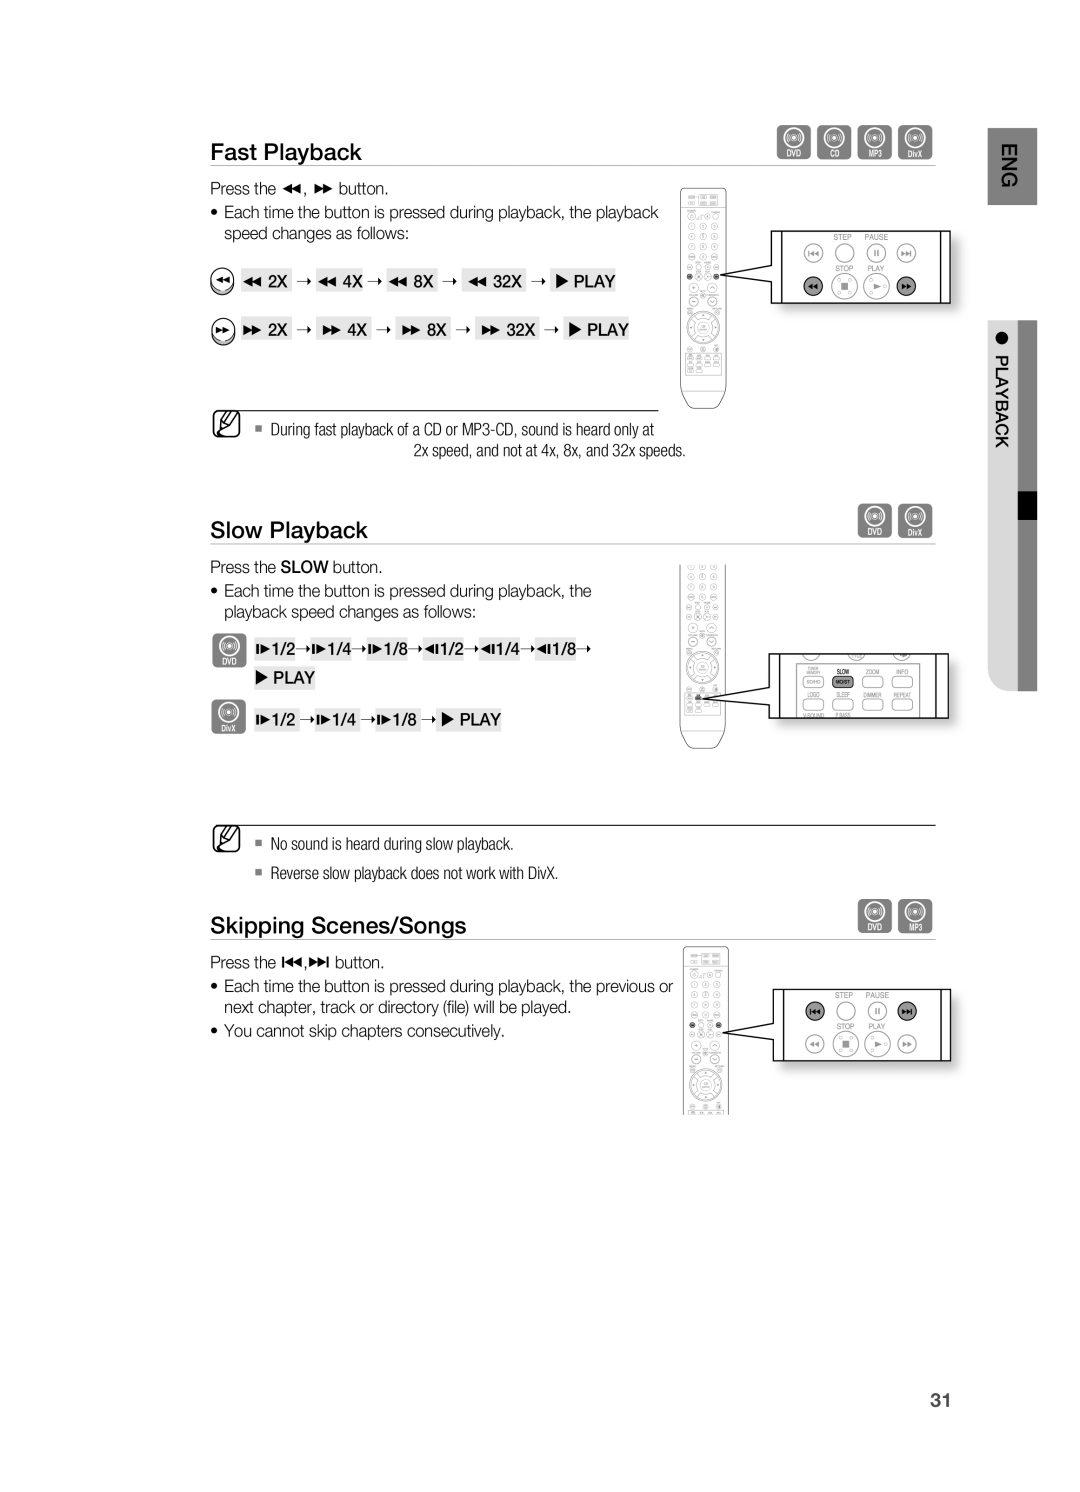 Samsung HT-A100 user manual Slow Playback, Skipping Scenes/Songs, Fast Playback 